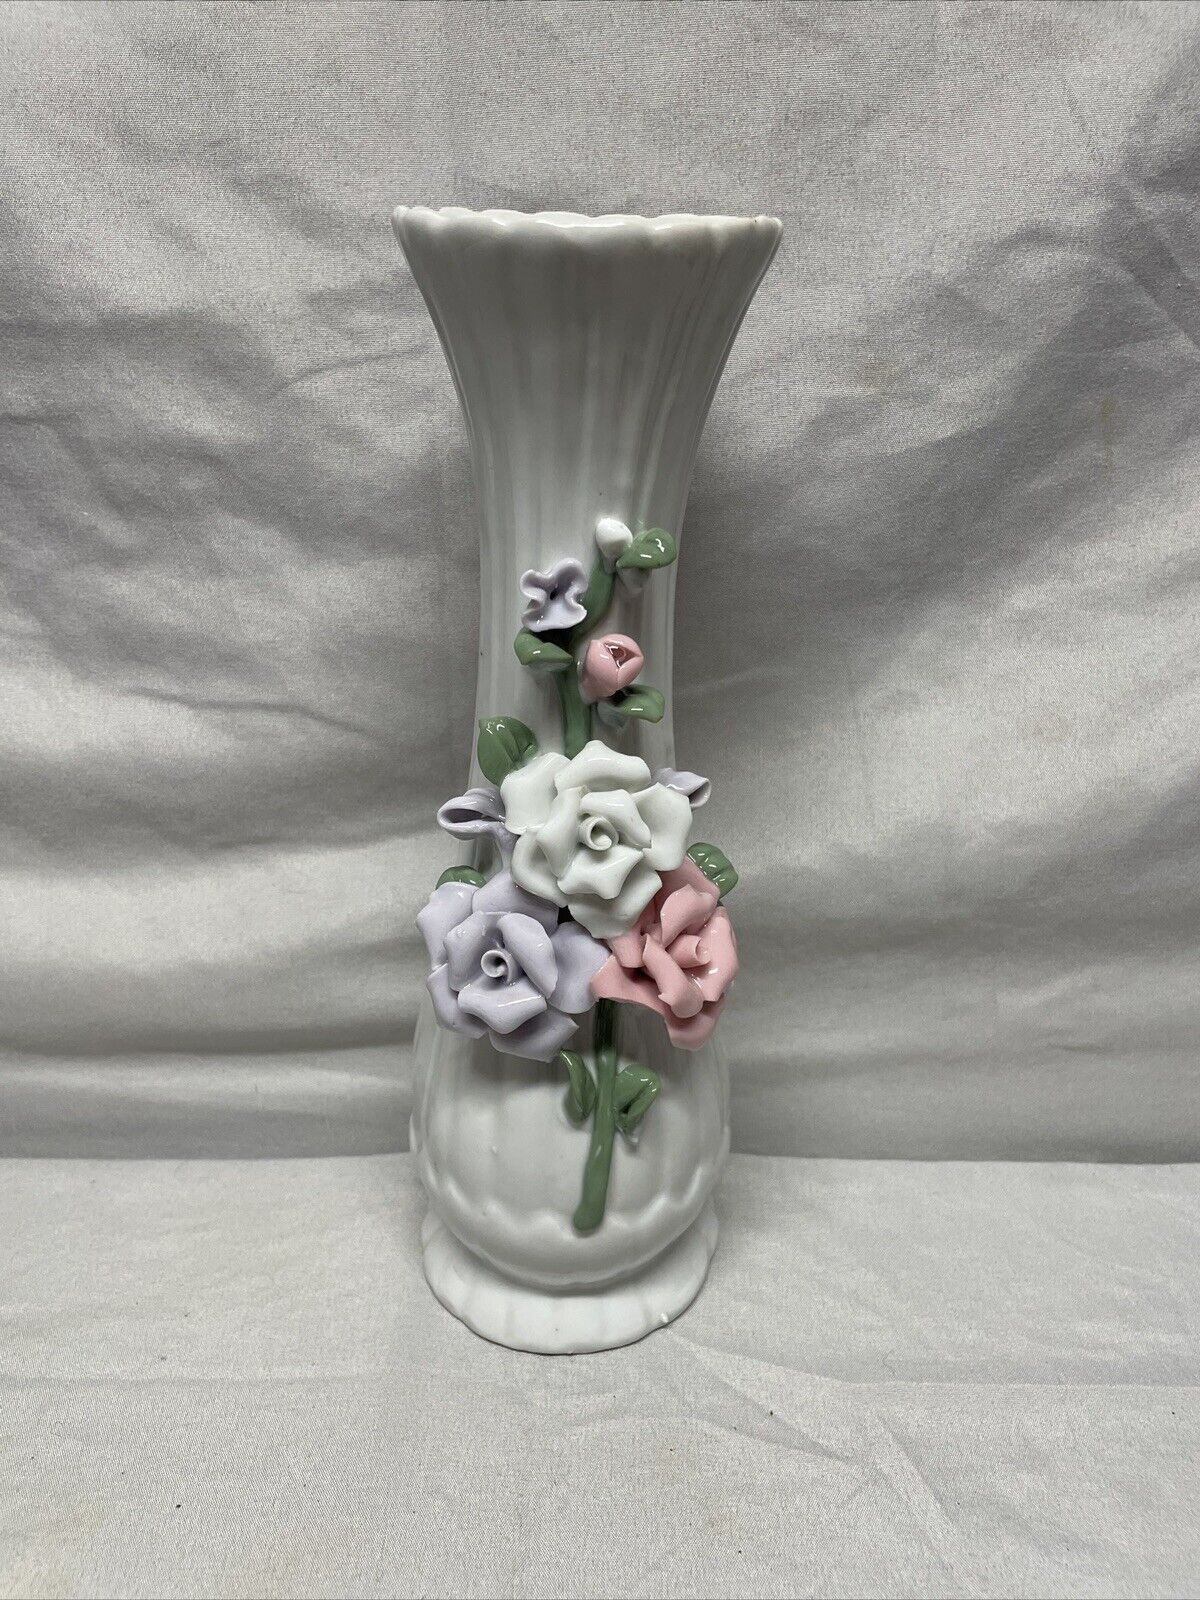 8 inchPorcelain Bud Vase  w/Applied Flowers  Hand Painted.